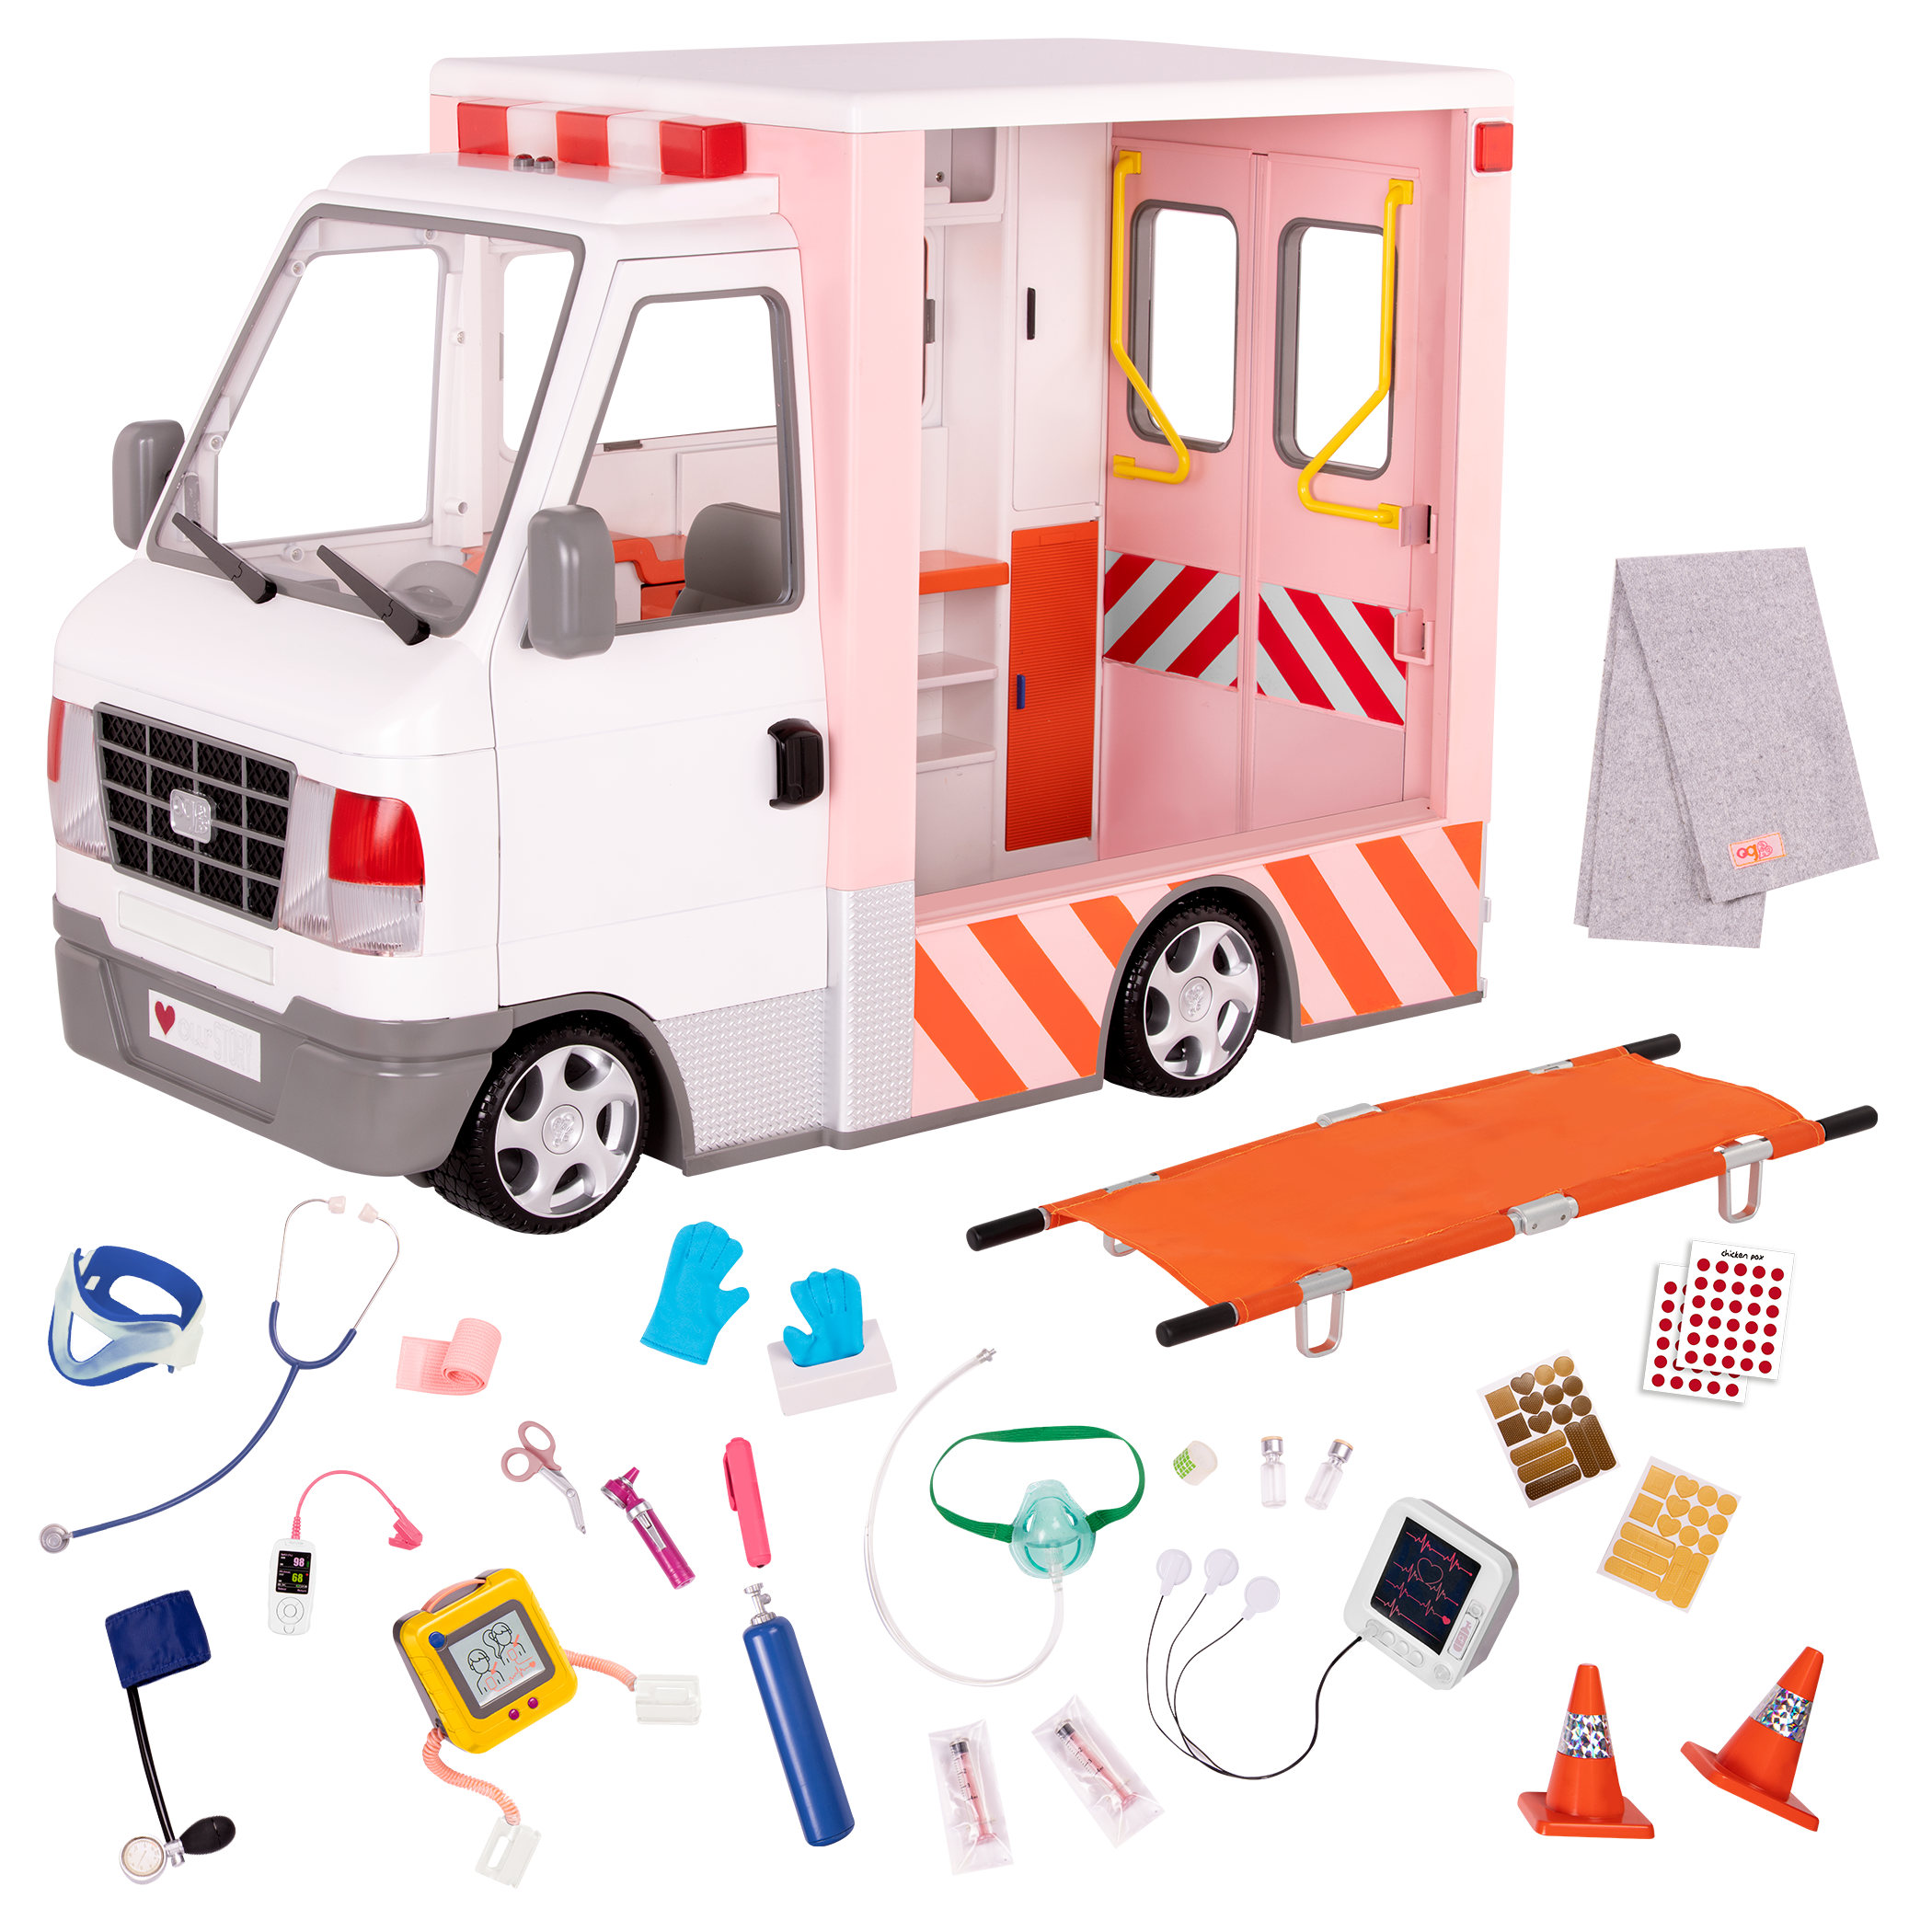 18-inch doll with toy ambulance